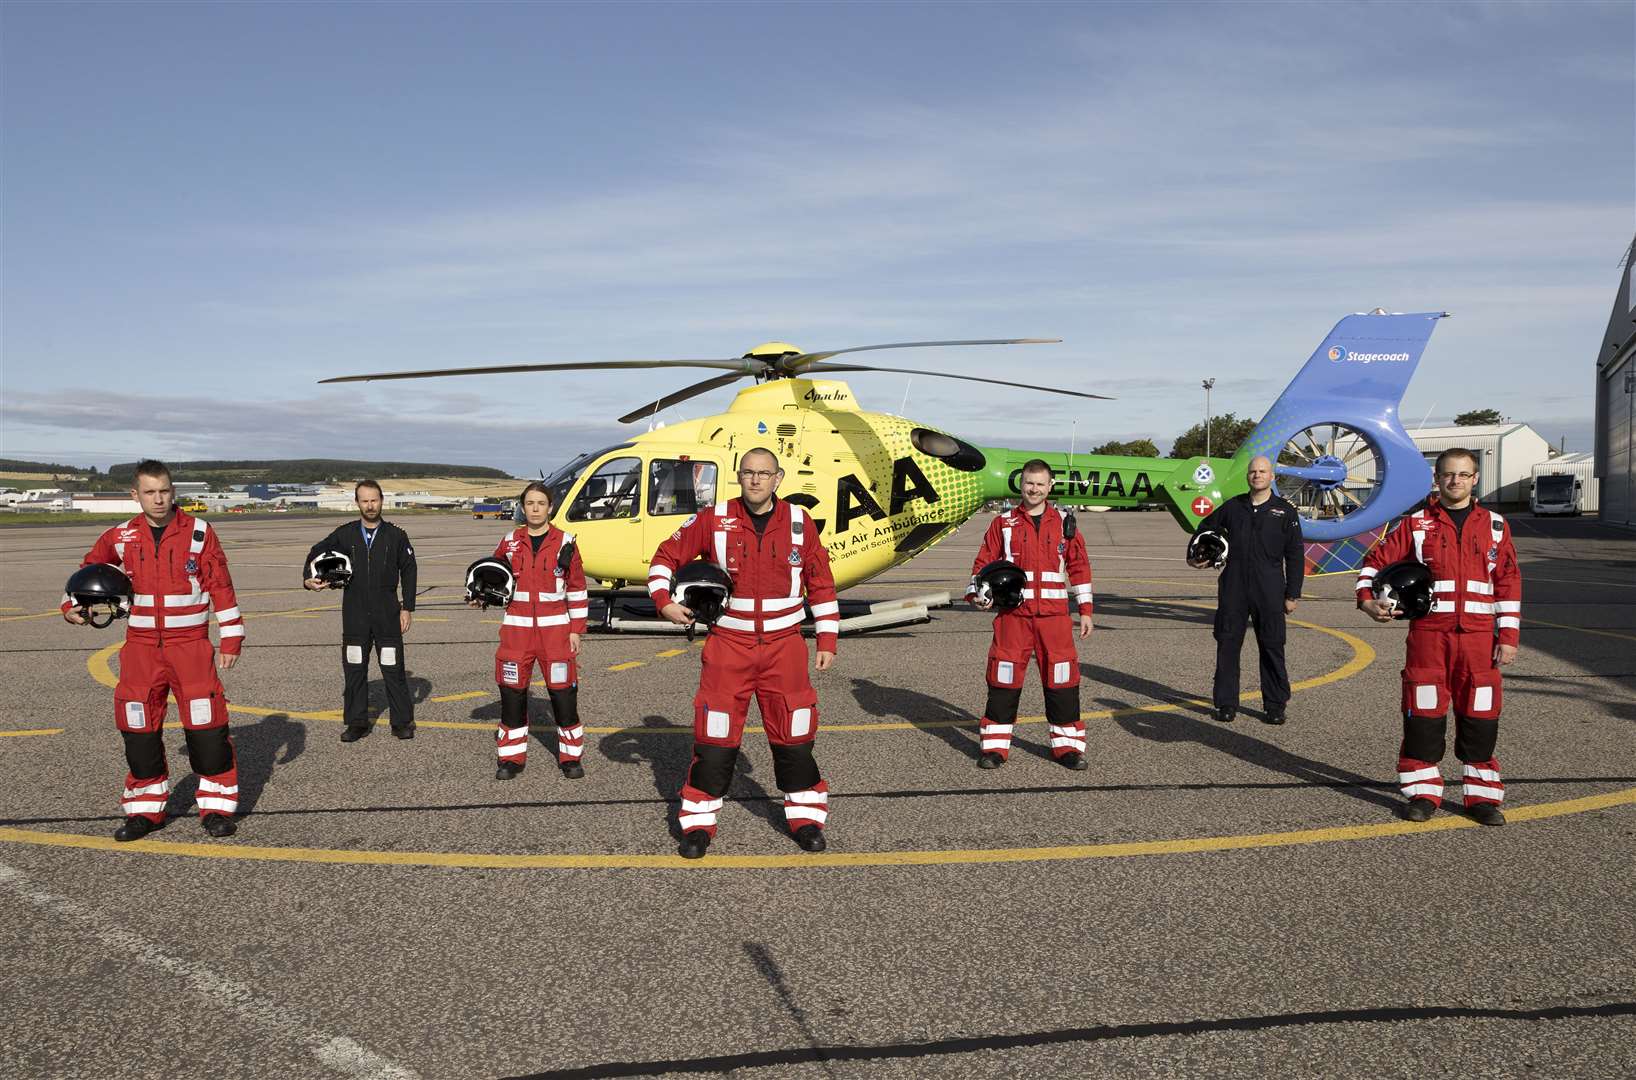 Scotland’s Charity Air Ambulance Base, Aberdeen (SCAA) home to Helimed 79.Pictured from left, Chriss Doyle (paramedic), Captain Jon Stupart (pilot), Laura McAllister (paramedic), Ewan Littlejohn (lead paramedic), Rich Forte (paramedic), Captain Pete Winn (pilot) and Owen McLauchlan (paramedic)..Picture by Graeme Hart..Copyright Perthshire Picture Agency